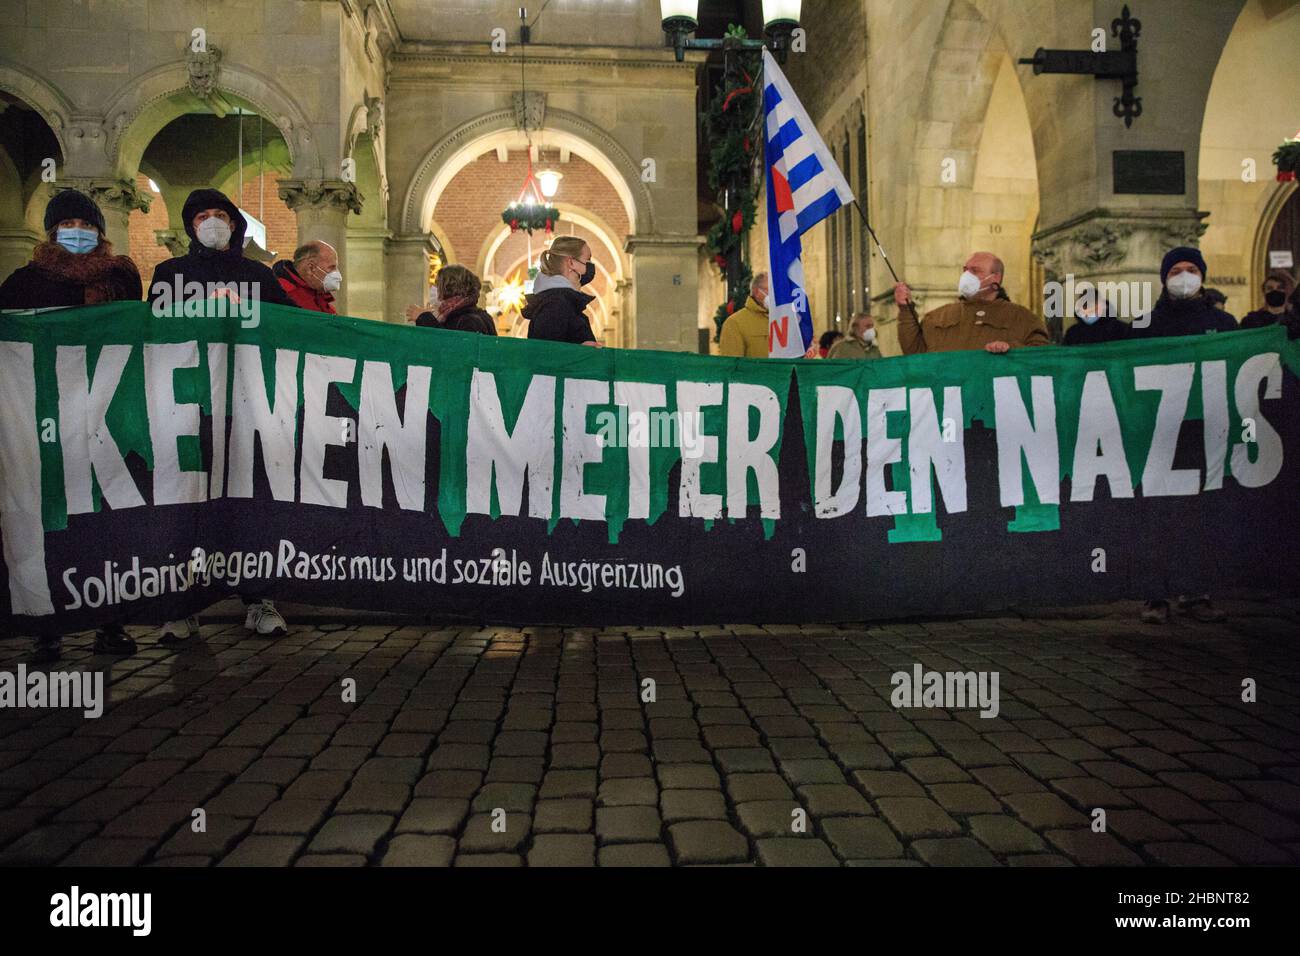 Münster, NRW, Germany. 20th Dec, 2021. Protesters with a placard saying 'Keinen Meter den Nazis' (Don't give space to Nazis') against racism and social segregation. Activists and protesters from several organisations have congregated in the city centre, protesting against conspiracy theories, racism, anti-semitism and social segregation, and for vaccinations. Credit: Imageplotter/Alamy Live News Stock Photo